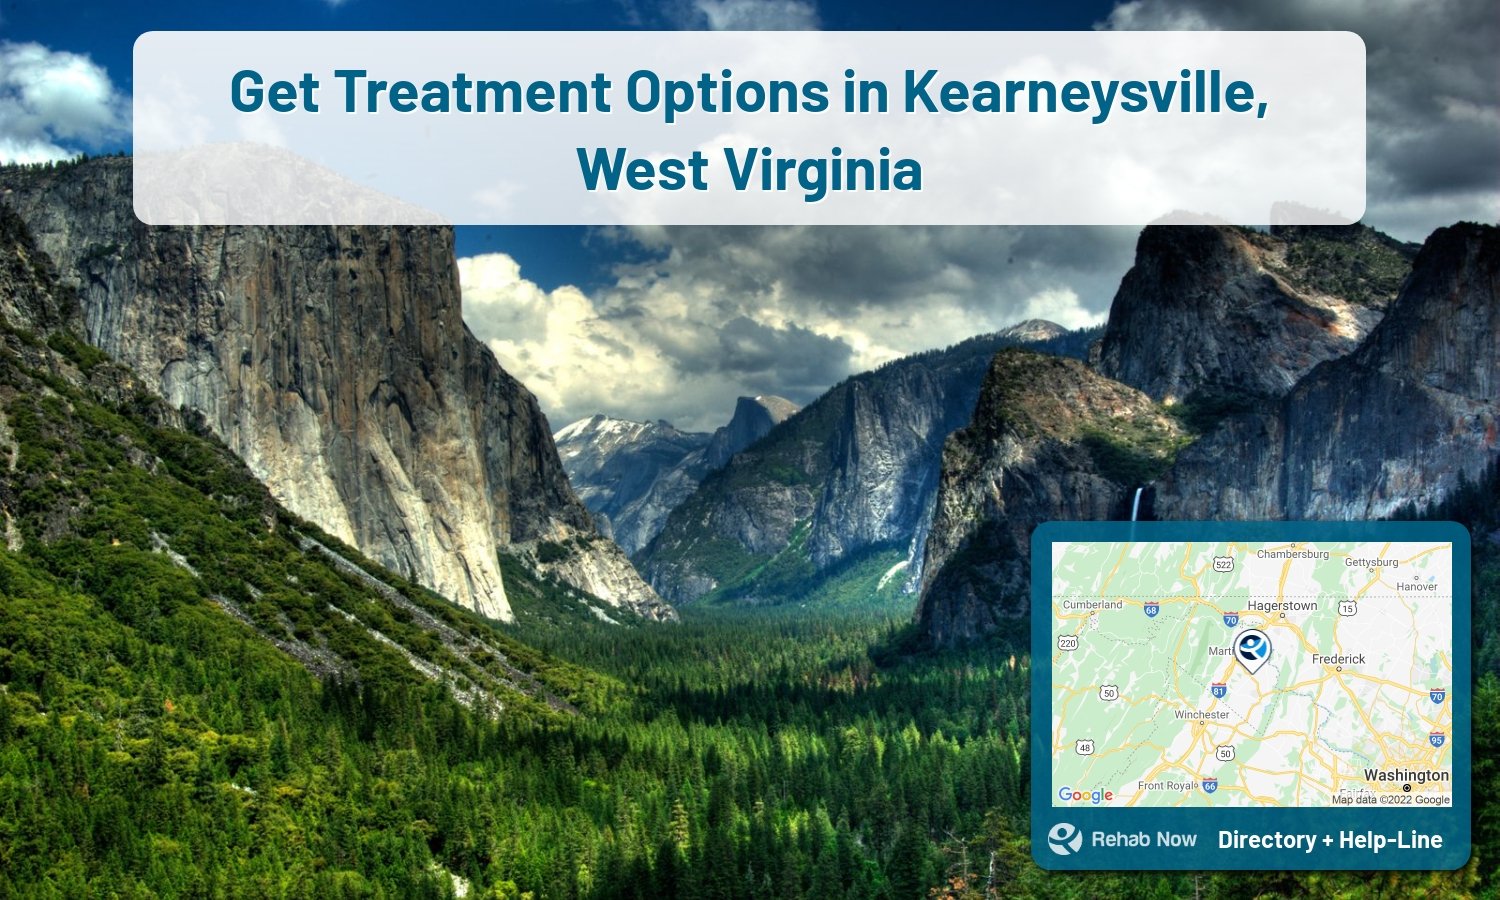 Drug rehab and alcohol treatment services near you in Kearneysville, West Virginia. Need help choosing a center? Call us, free.